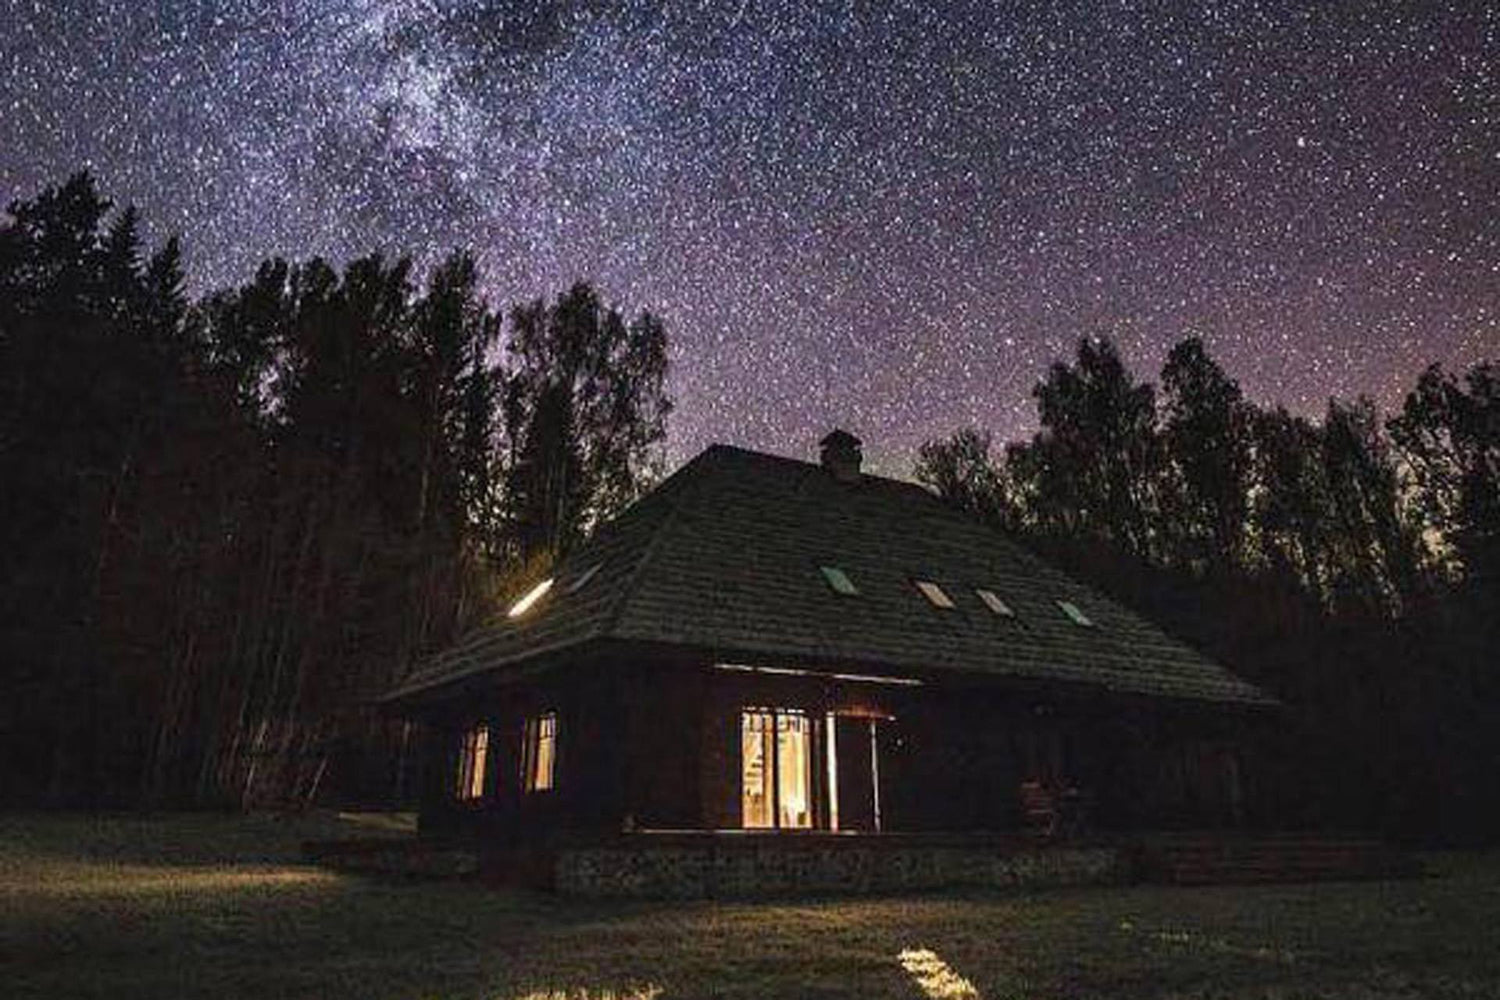 How to Take Milky Way Pictures